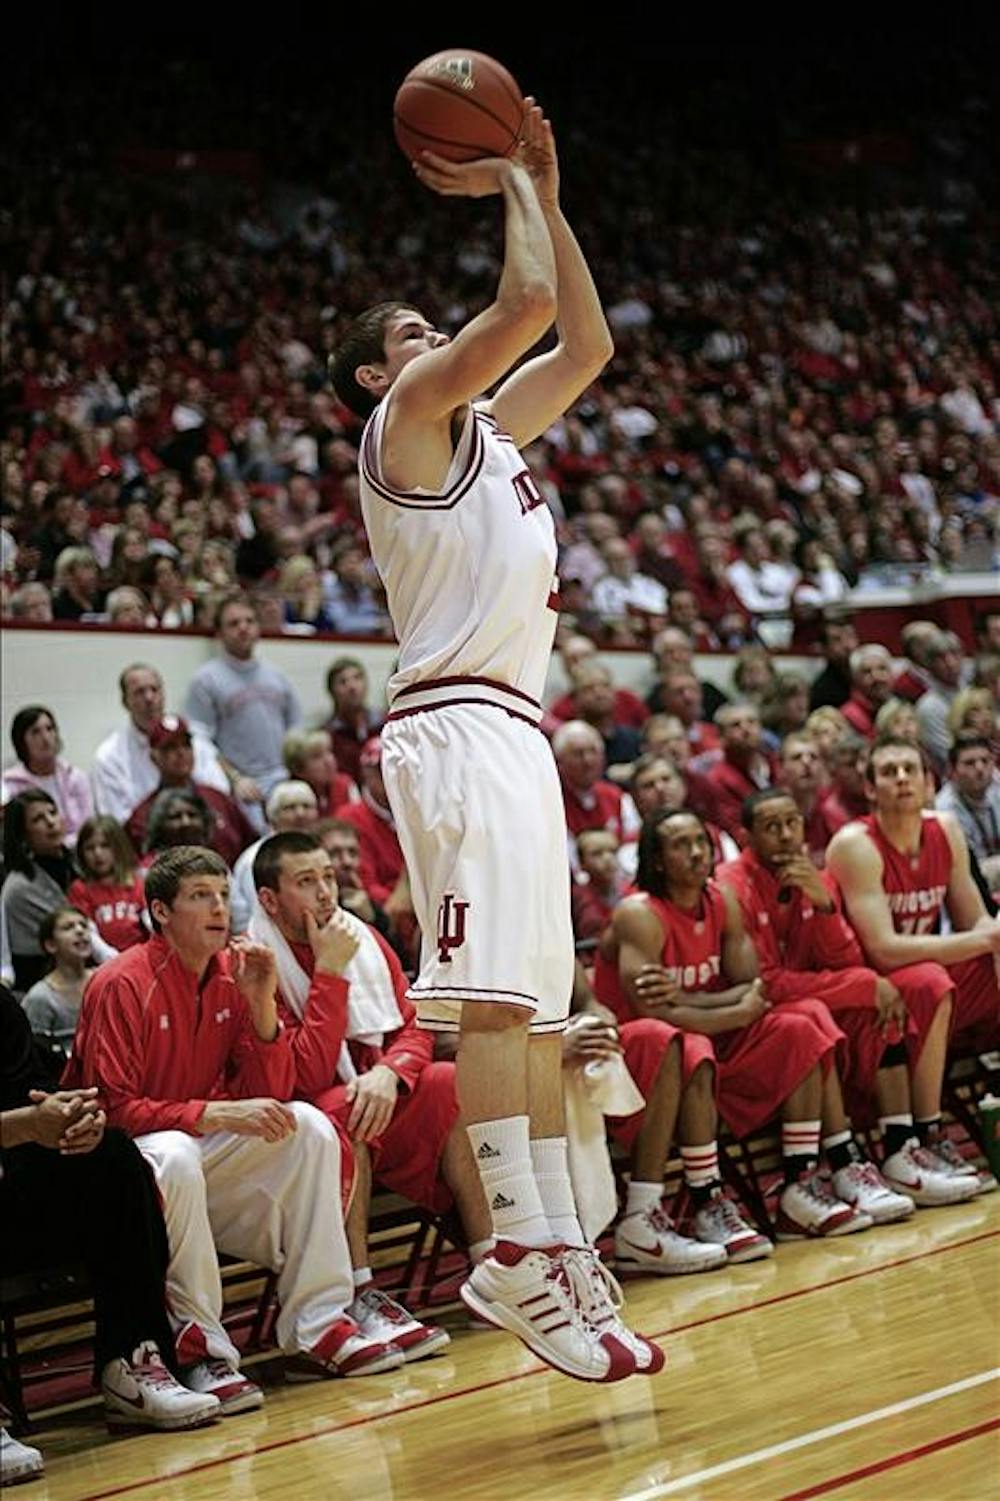 Freshman guard Matt Roth launches a 3-point shot from the corner during the Hoosiers 93-81 loss to Ohio State Saturday afternoon at Assembly Hall. Roth scored a career high 29 points shooting 9 of 11 from beyond the arc tying the IU single-game record.